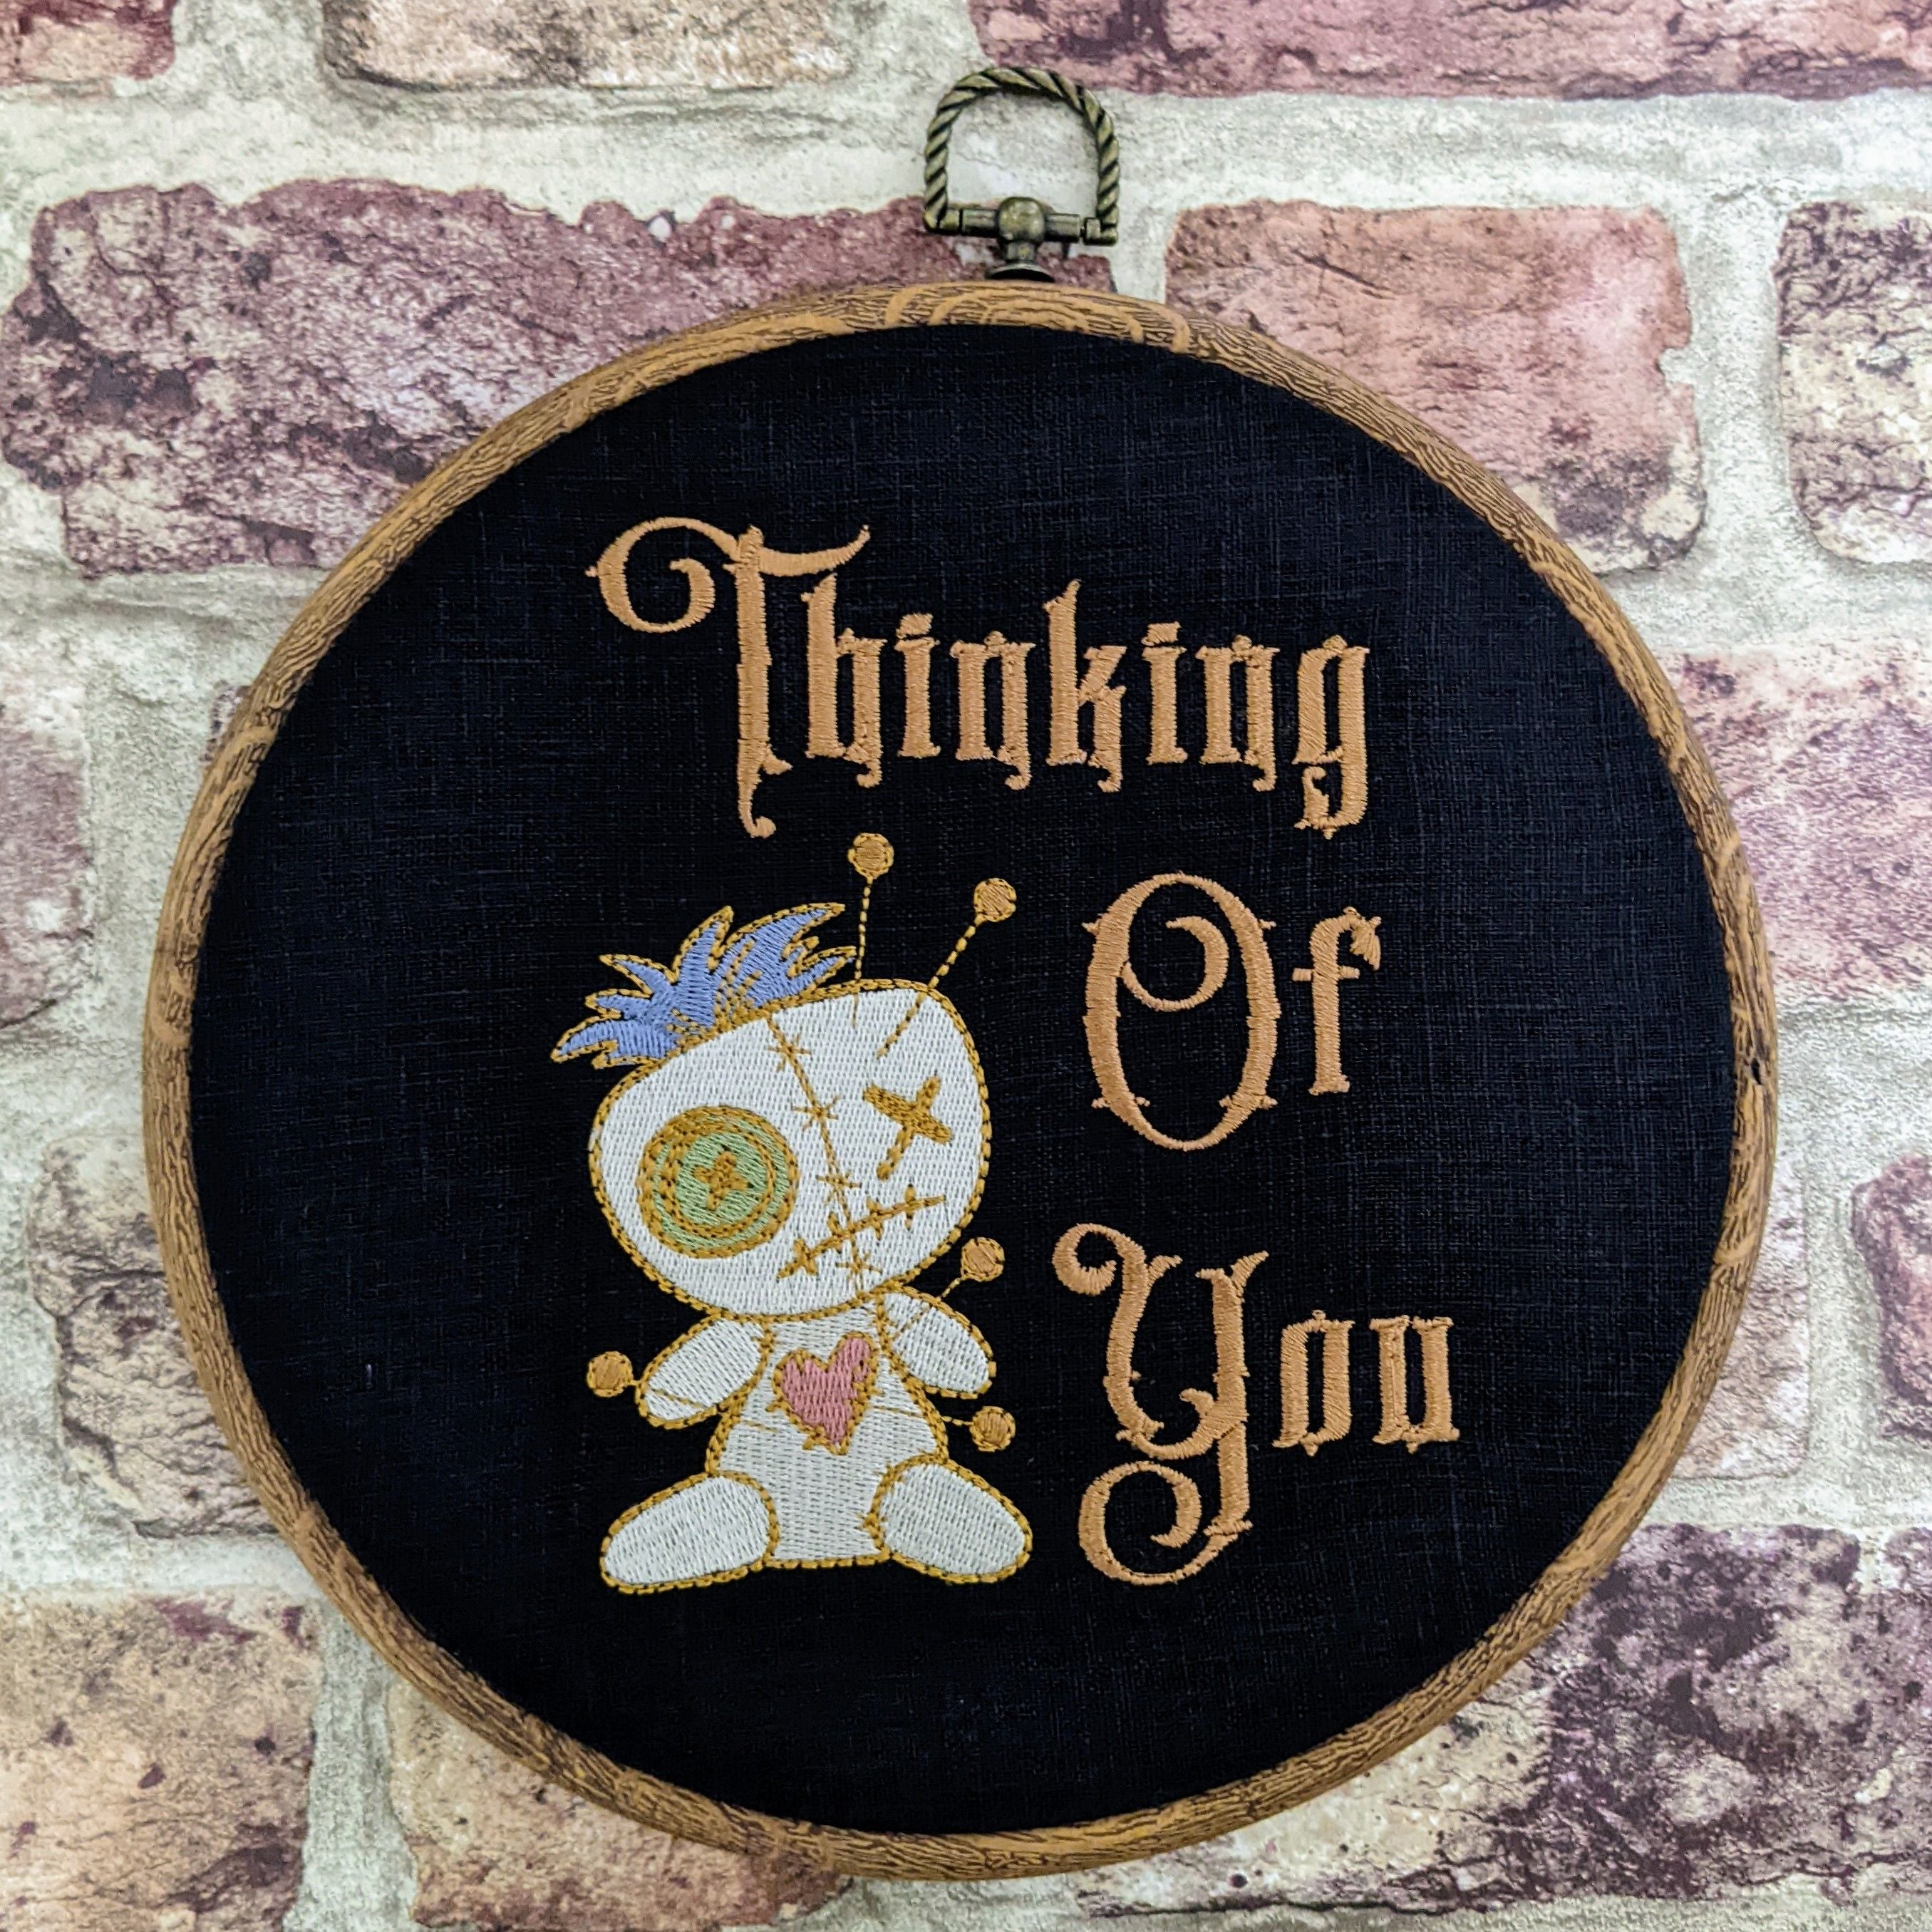 Thinking of you. Machine embroidery 8" hoop art